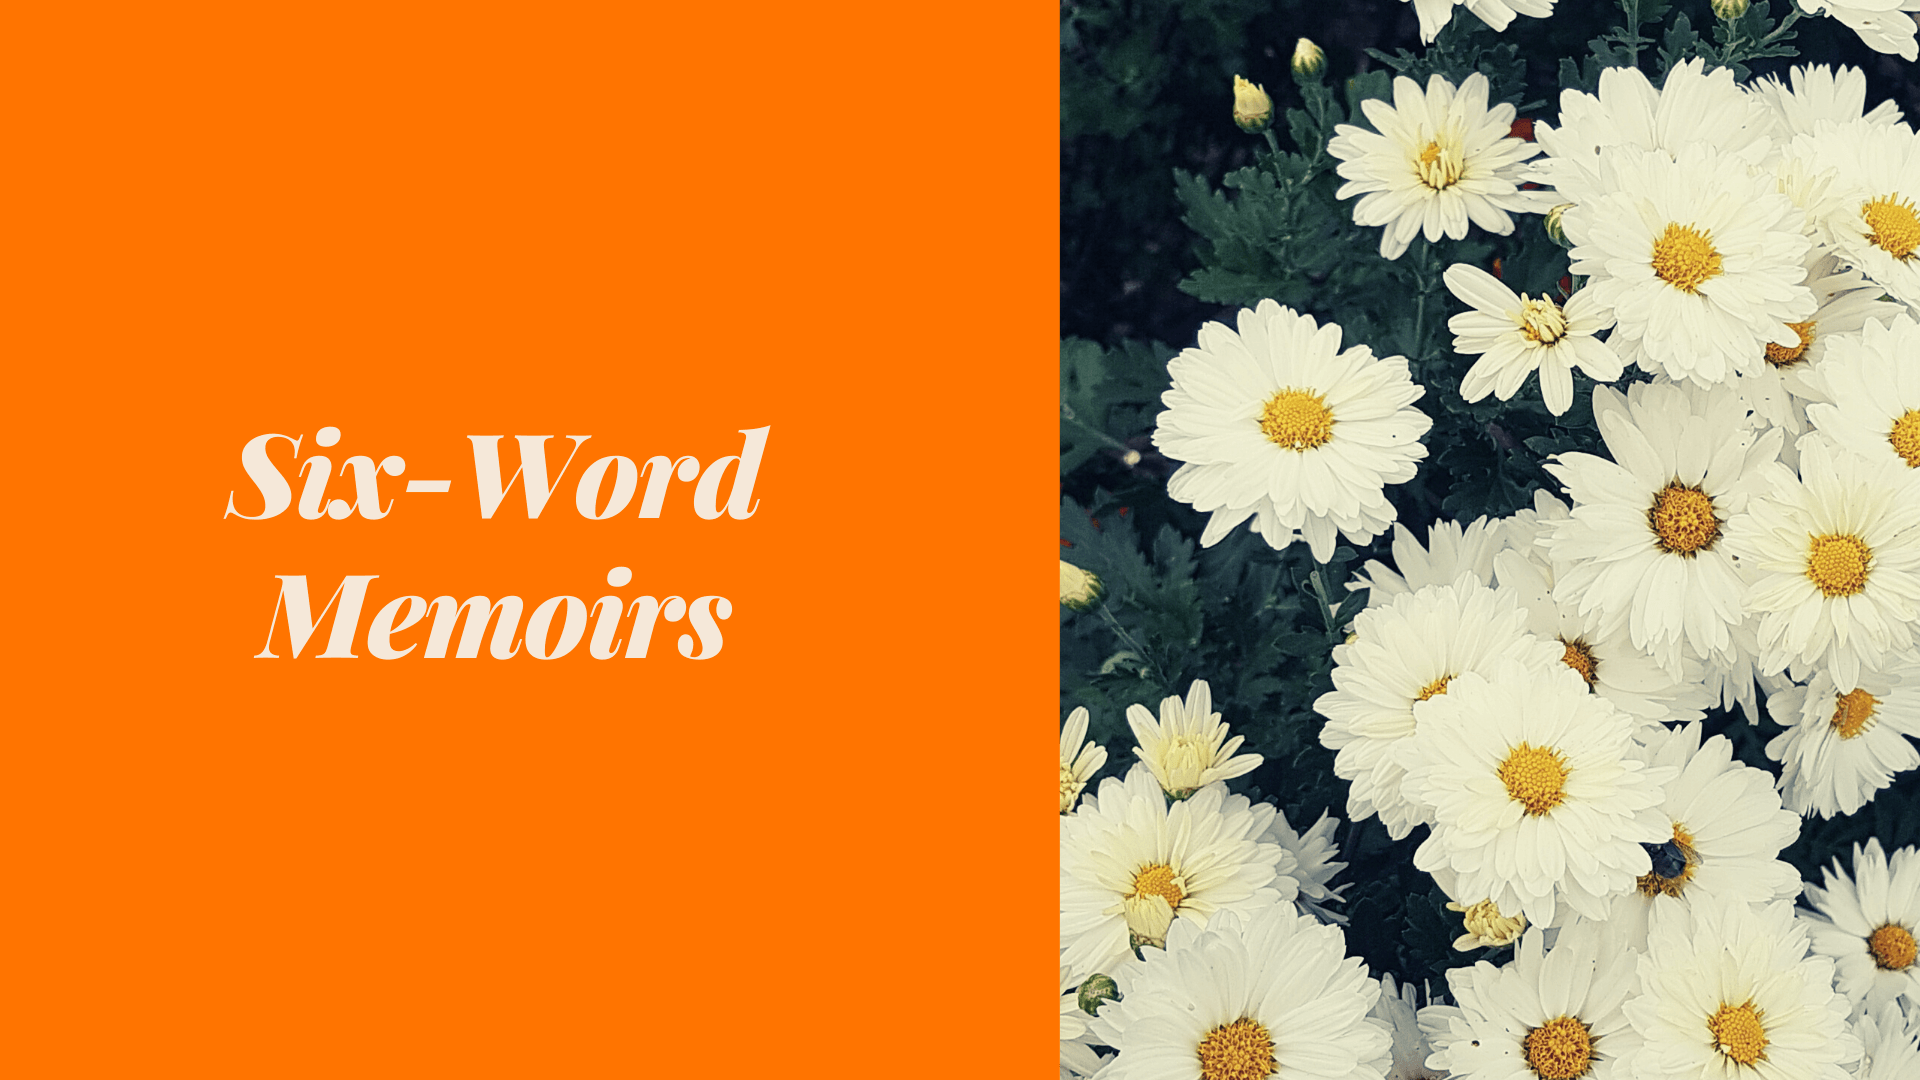 Six-word Memoirs appears on the left side of the image on an orange background; the right side of the image is a picture of some flowers